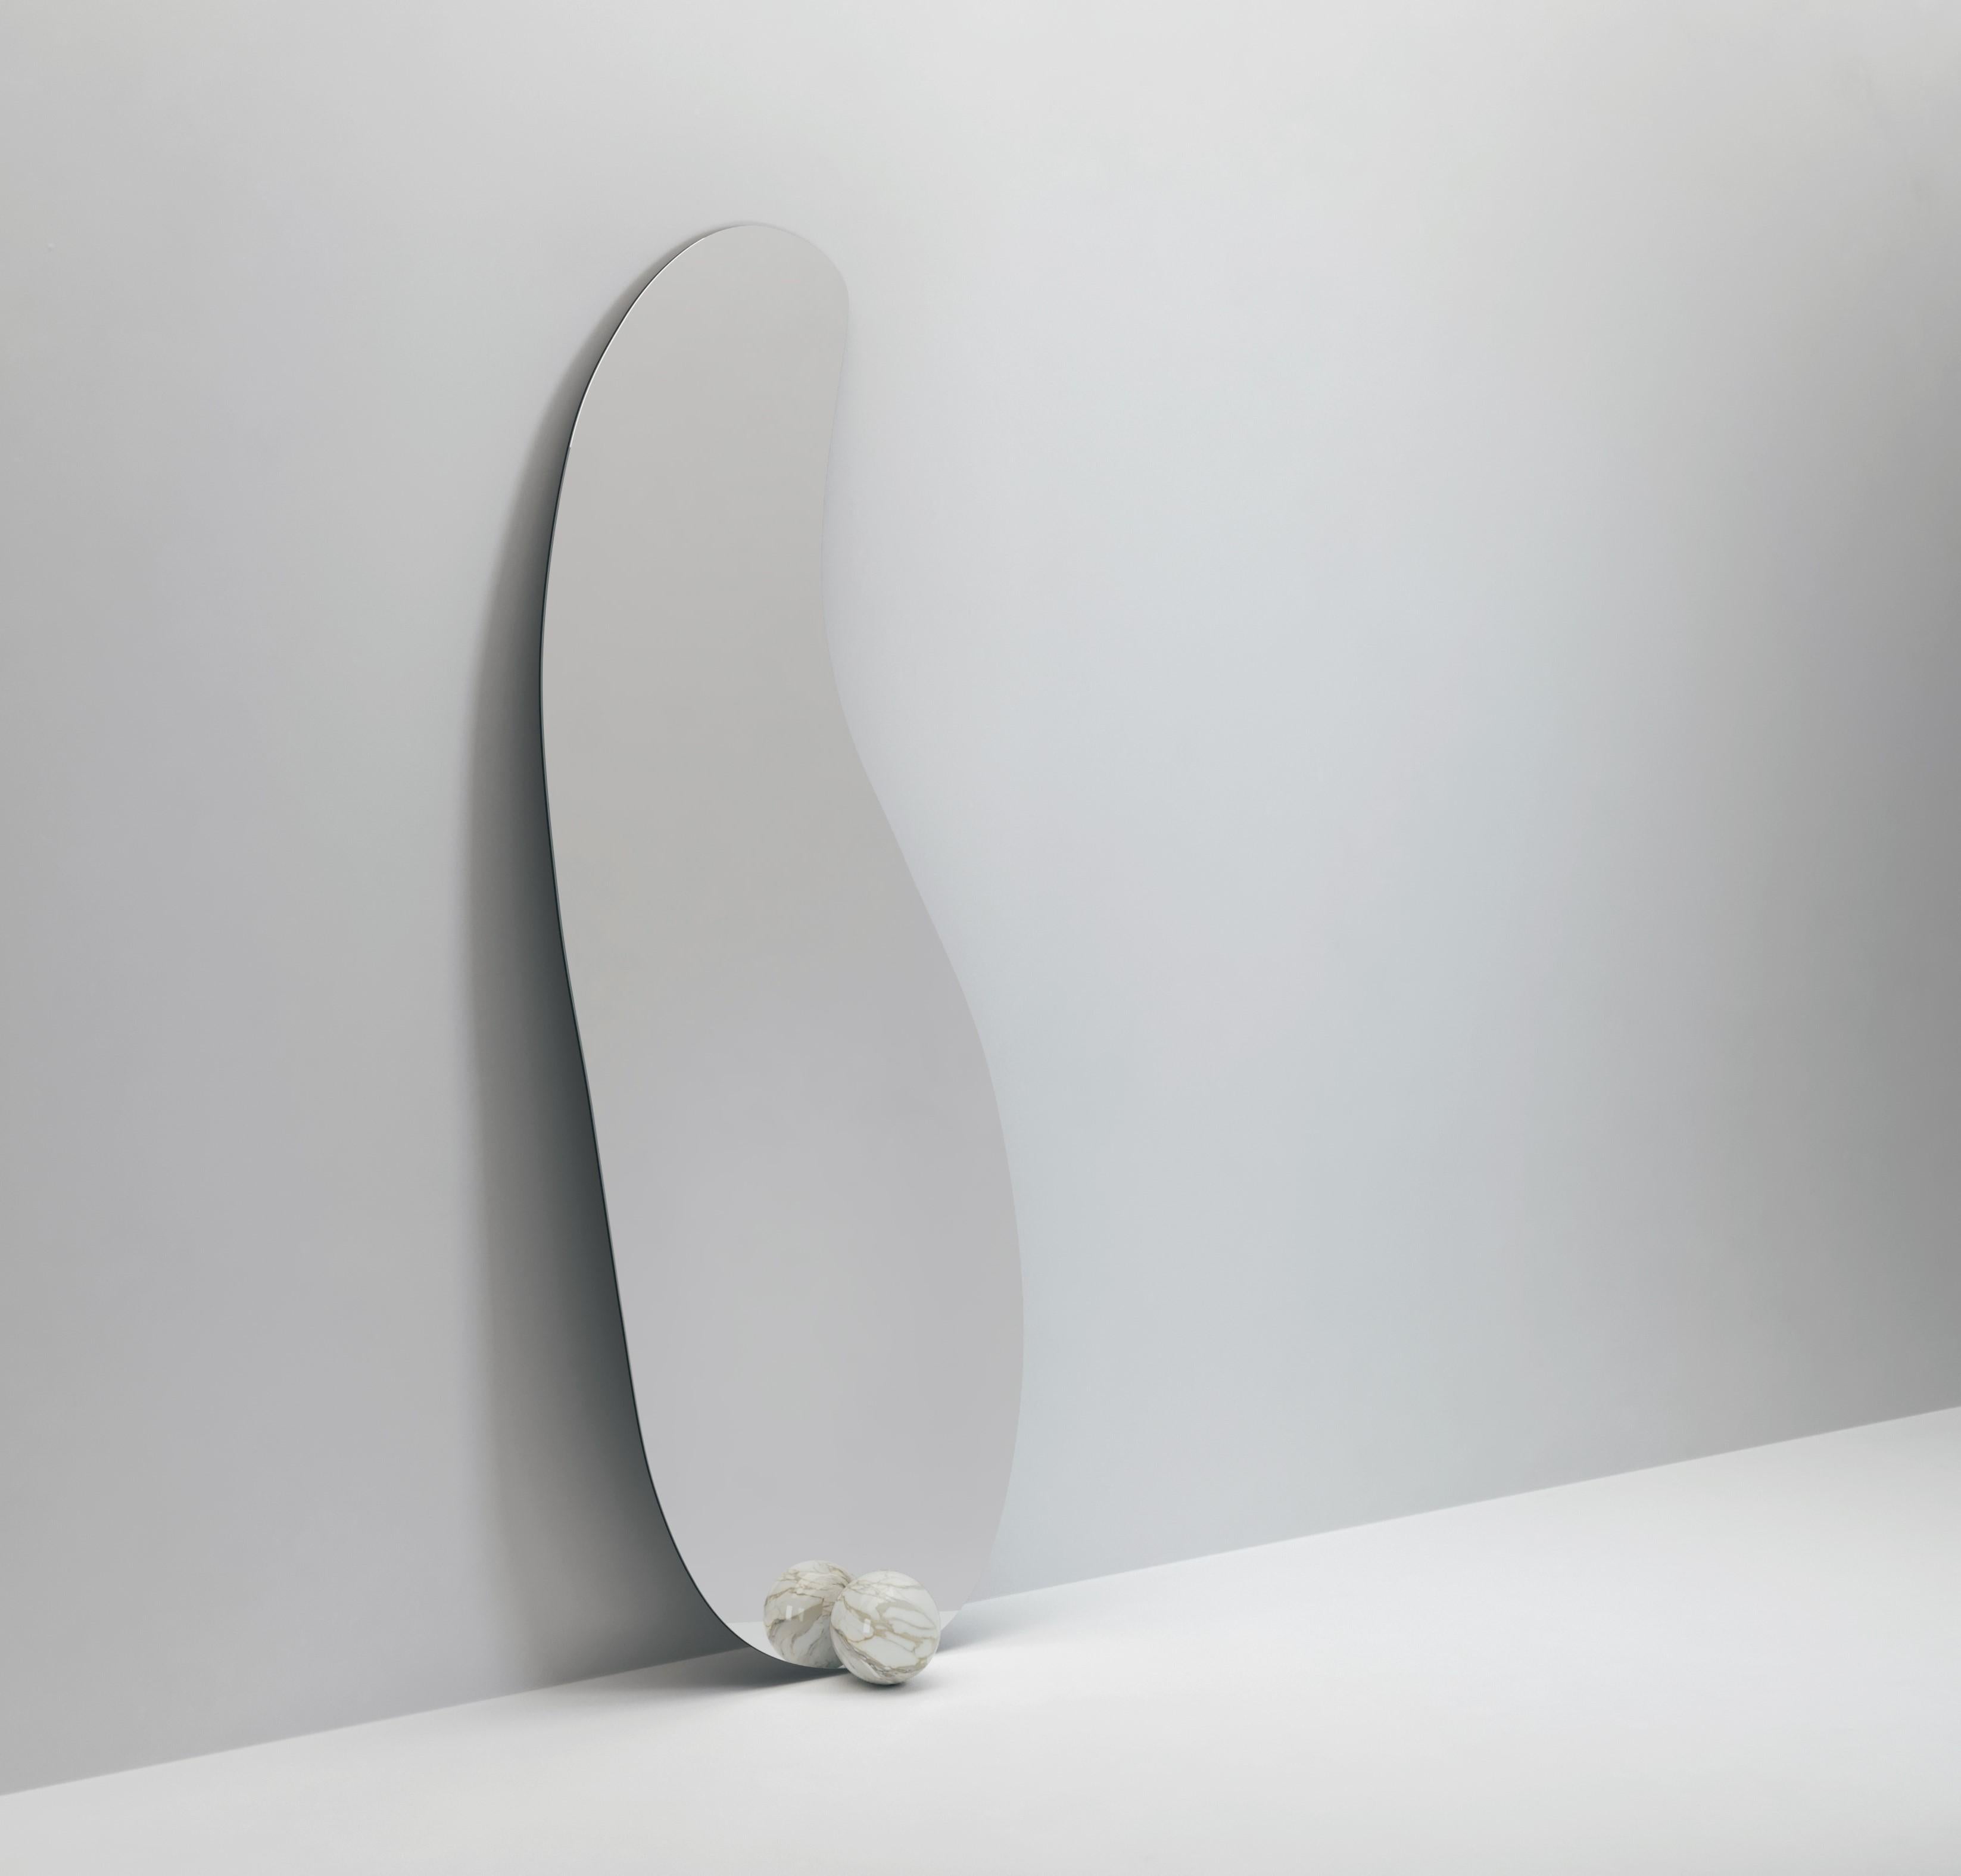 Inspired by the aesthetics and surrealism of Salvador Dali, the 1931 is an amorphous-shaped mirror, seemingly only held in place by a marble sphere. Available in a variety of different stones and metal finishes.

Dimension: 63 x 39.5 x 158.5 H